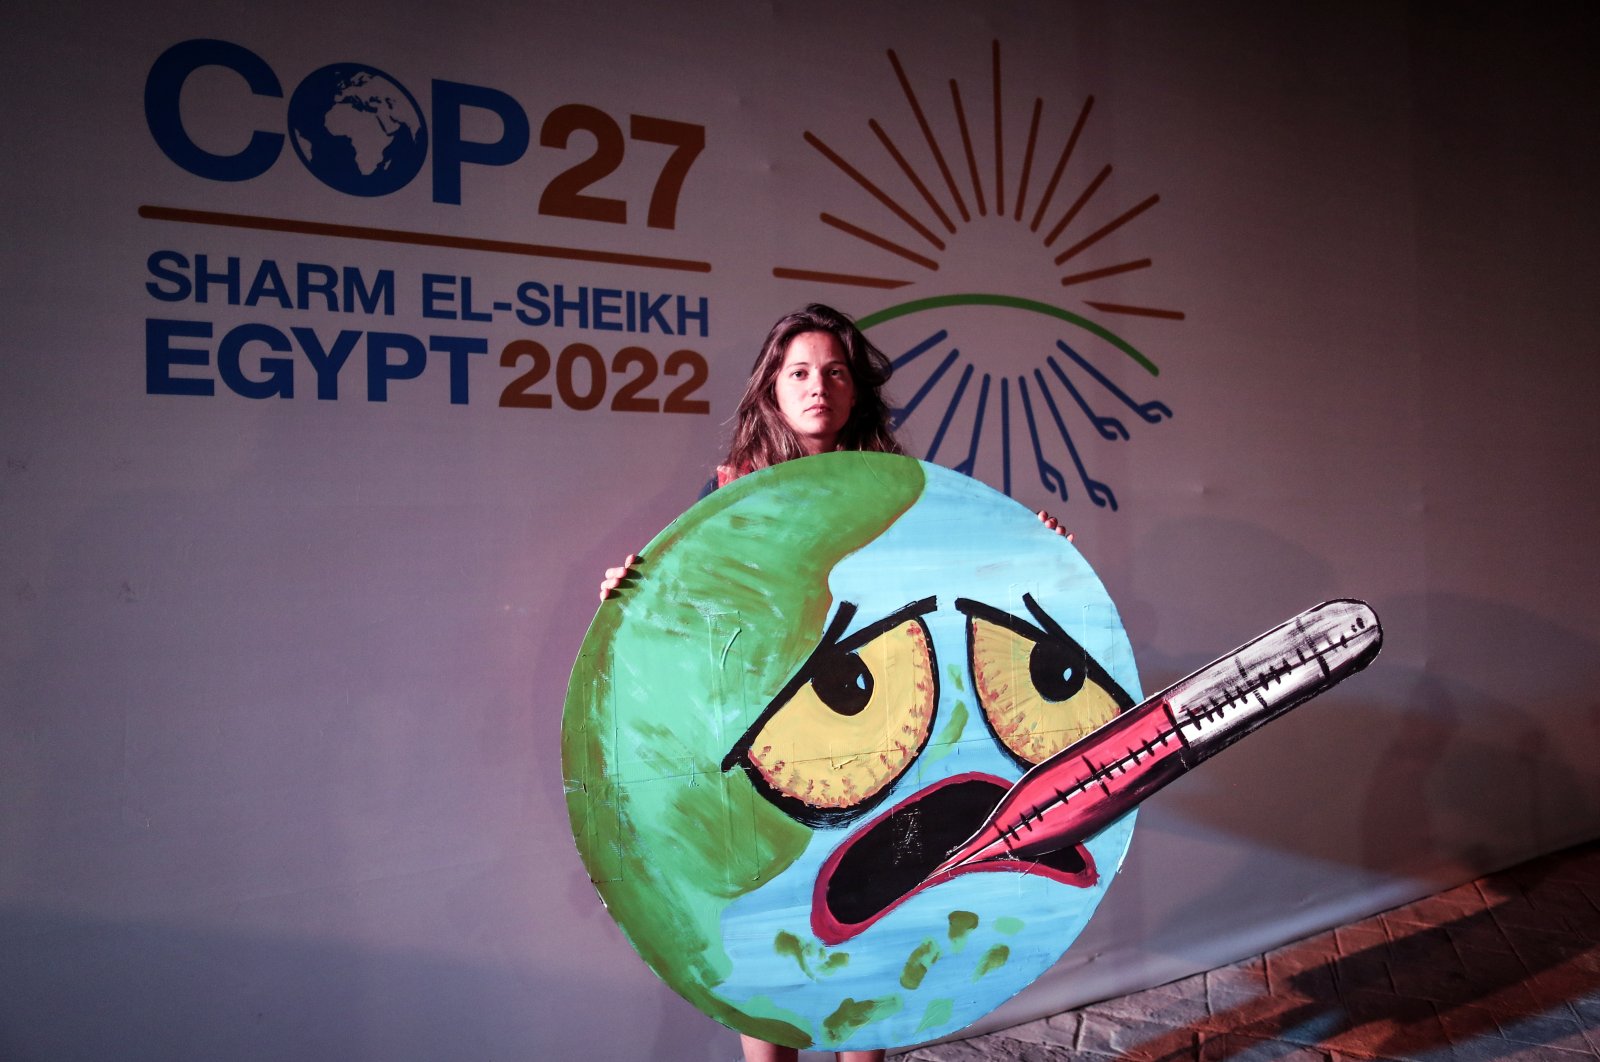 An activist holds a sign at the COP27 summit in Sharm El-Sheikh, Egypt, Nov. 19, 2022. (EPA Photo)